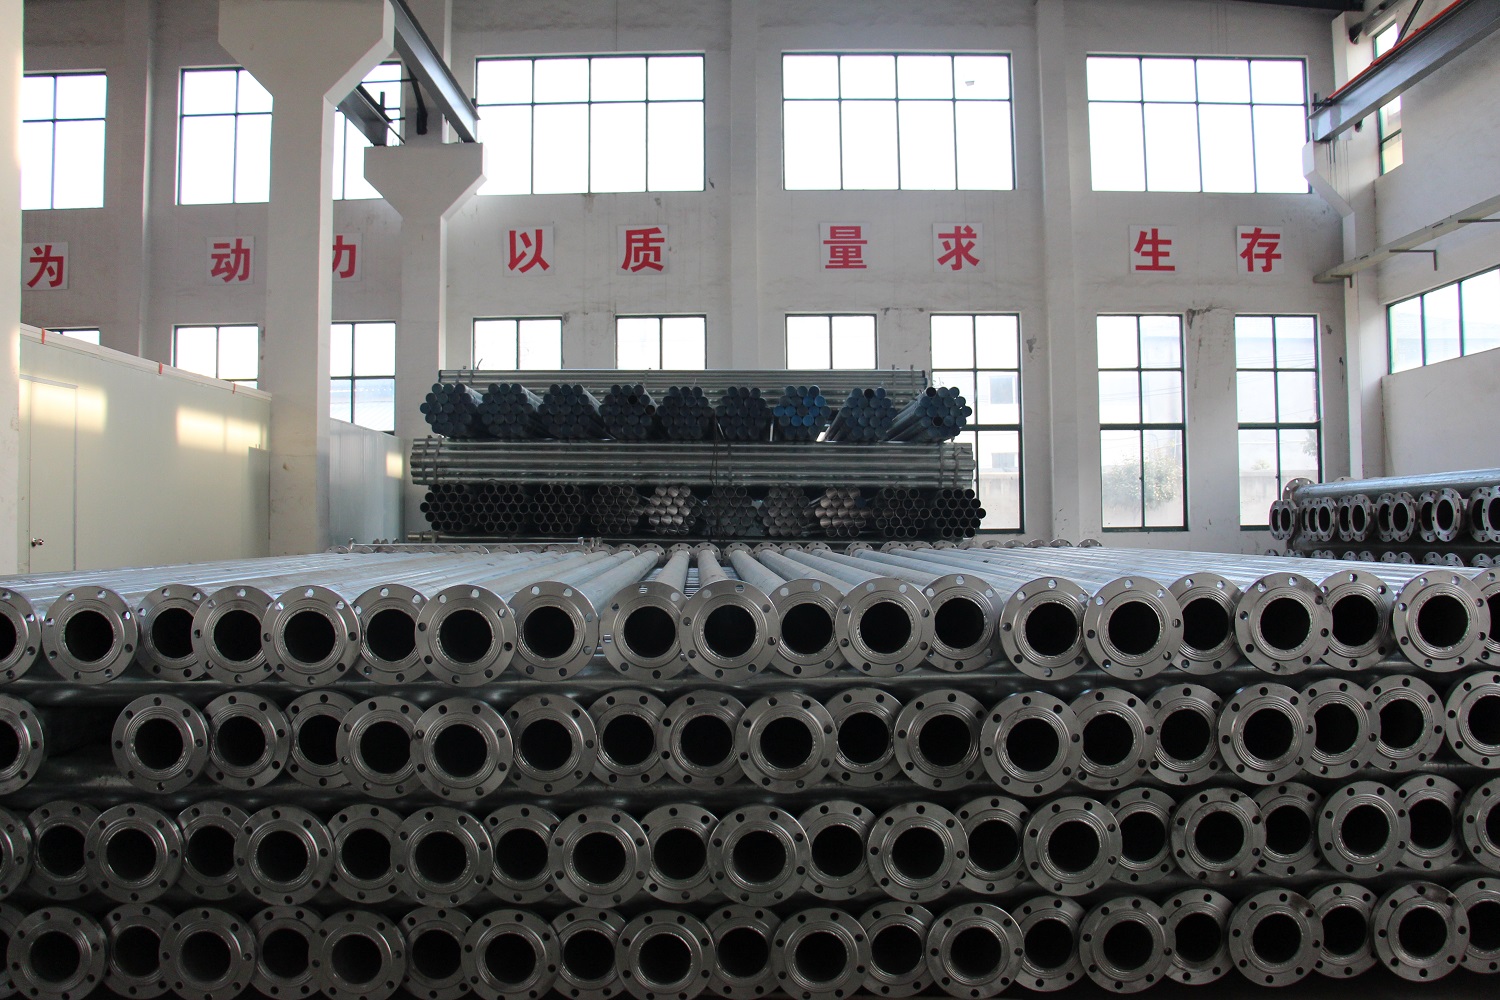 Austenitic Stainless Steel Lined Pipe